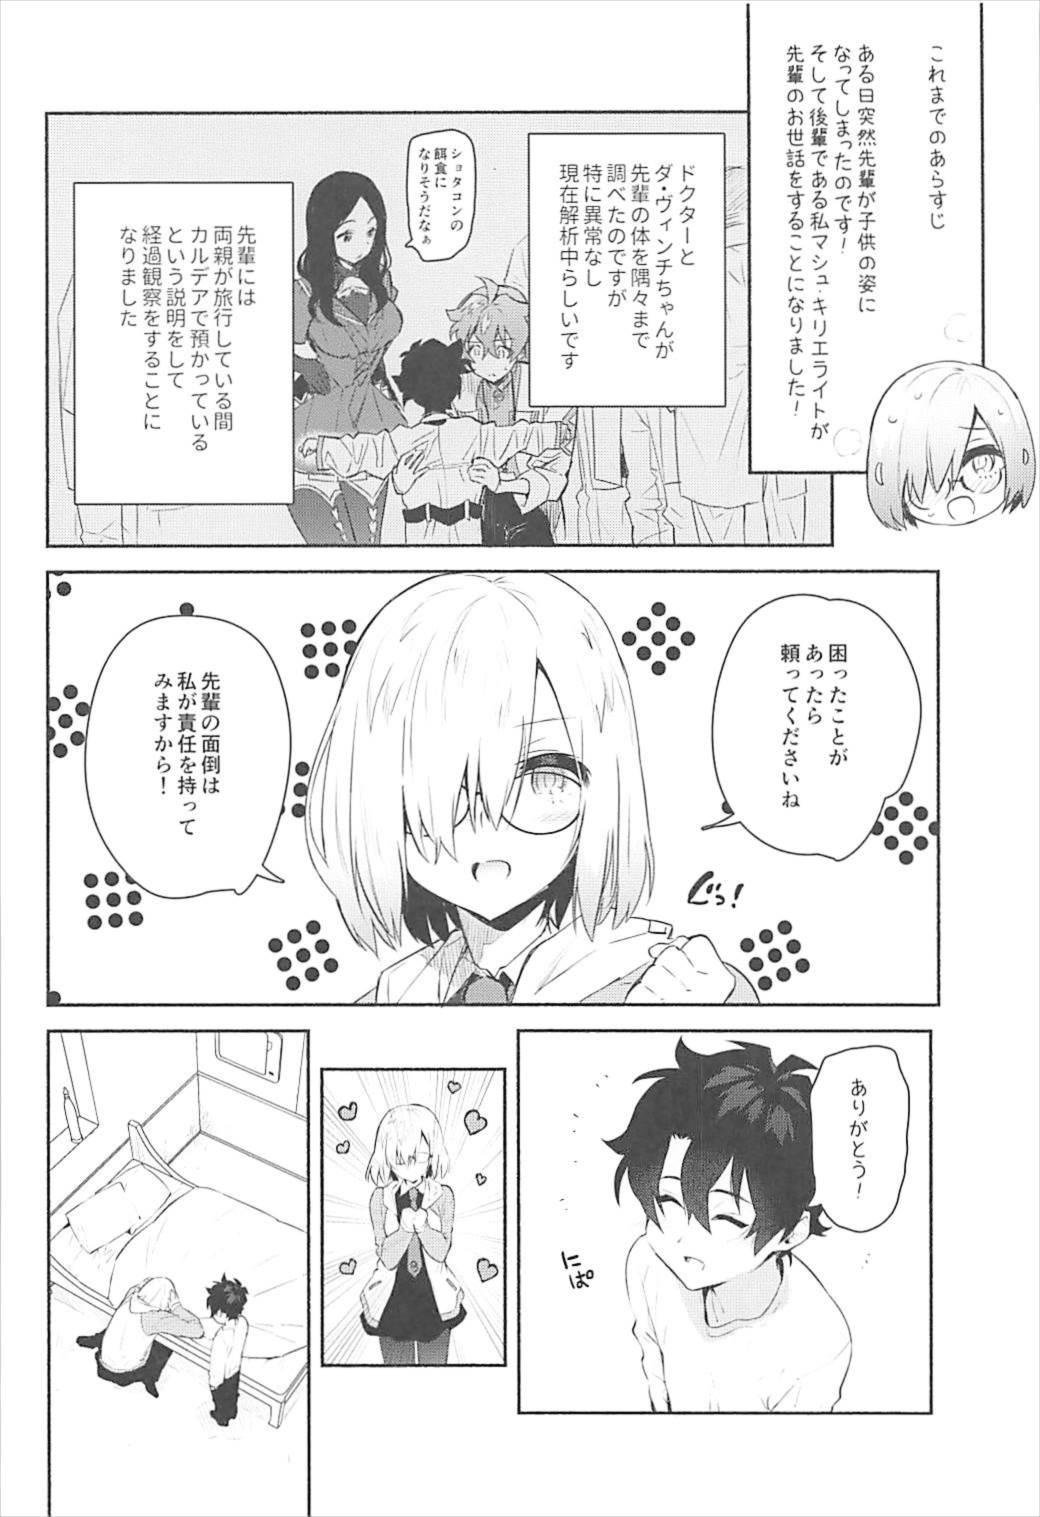 Australian Mash to Issho - Fate grand order Vintage - Page 5